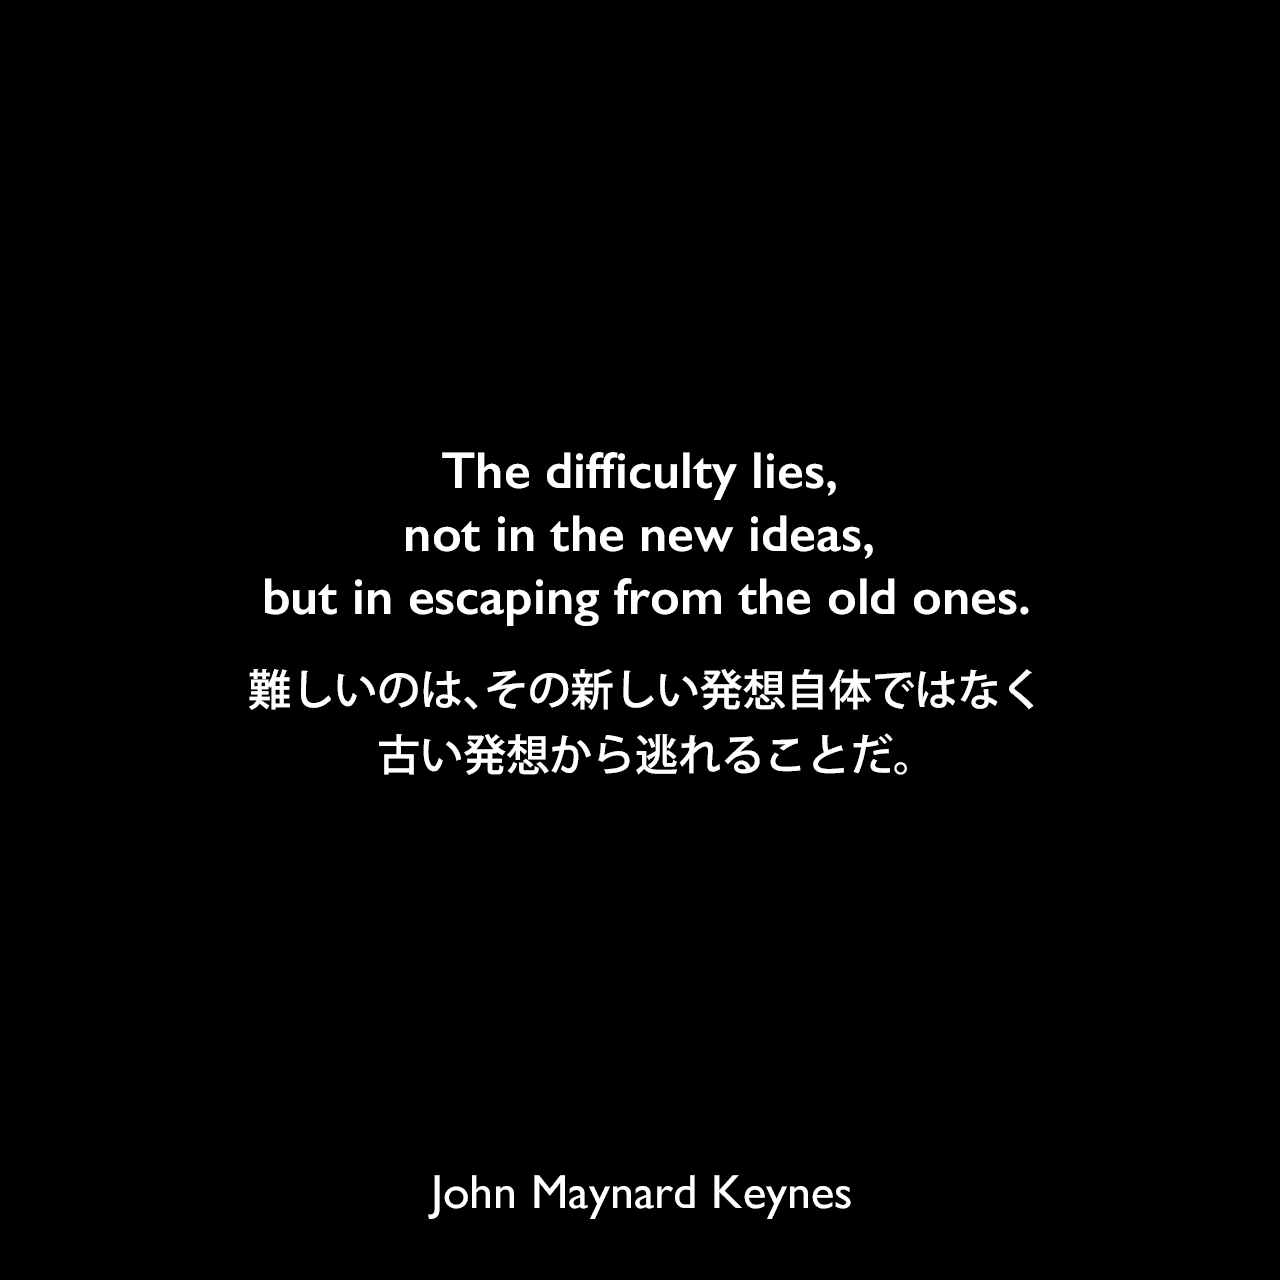 The difficulty lies, not in the new ideas, but in escaping from the old ones.難しいのは、その新しい発想自体ではなく、古い発想から逃れることだ。John Maynard Keynes